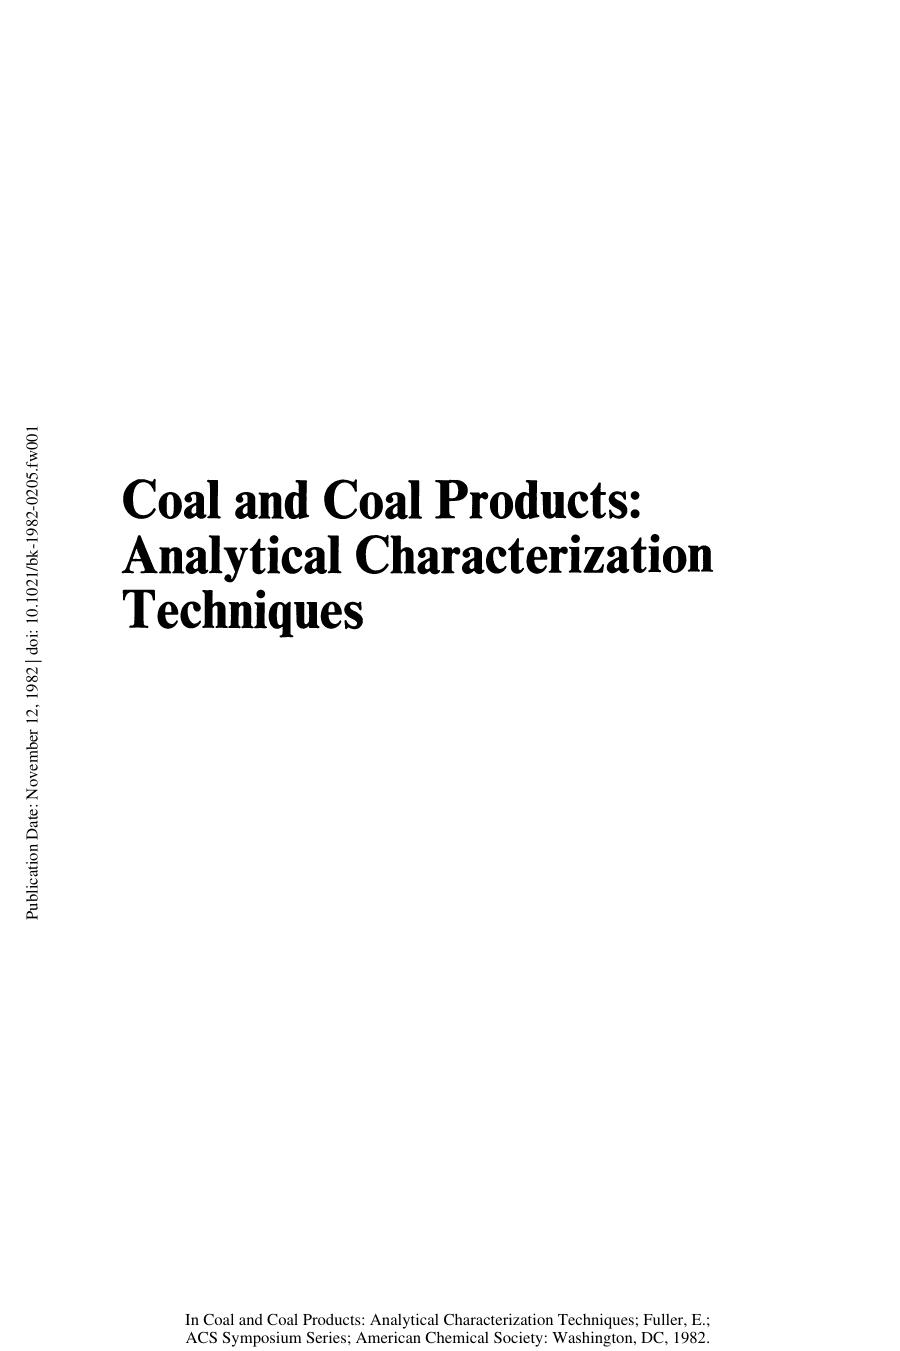 Coal and Coal Products